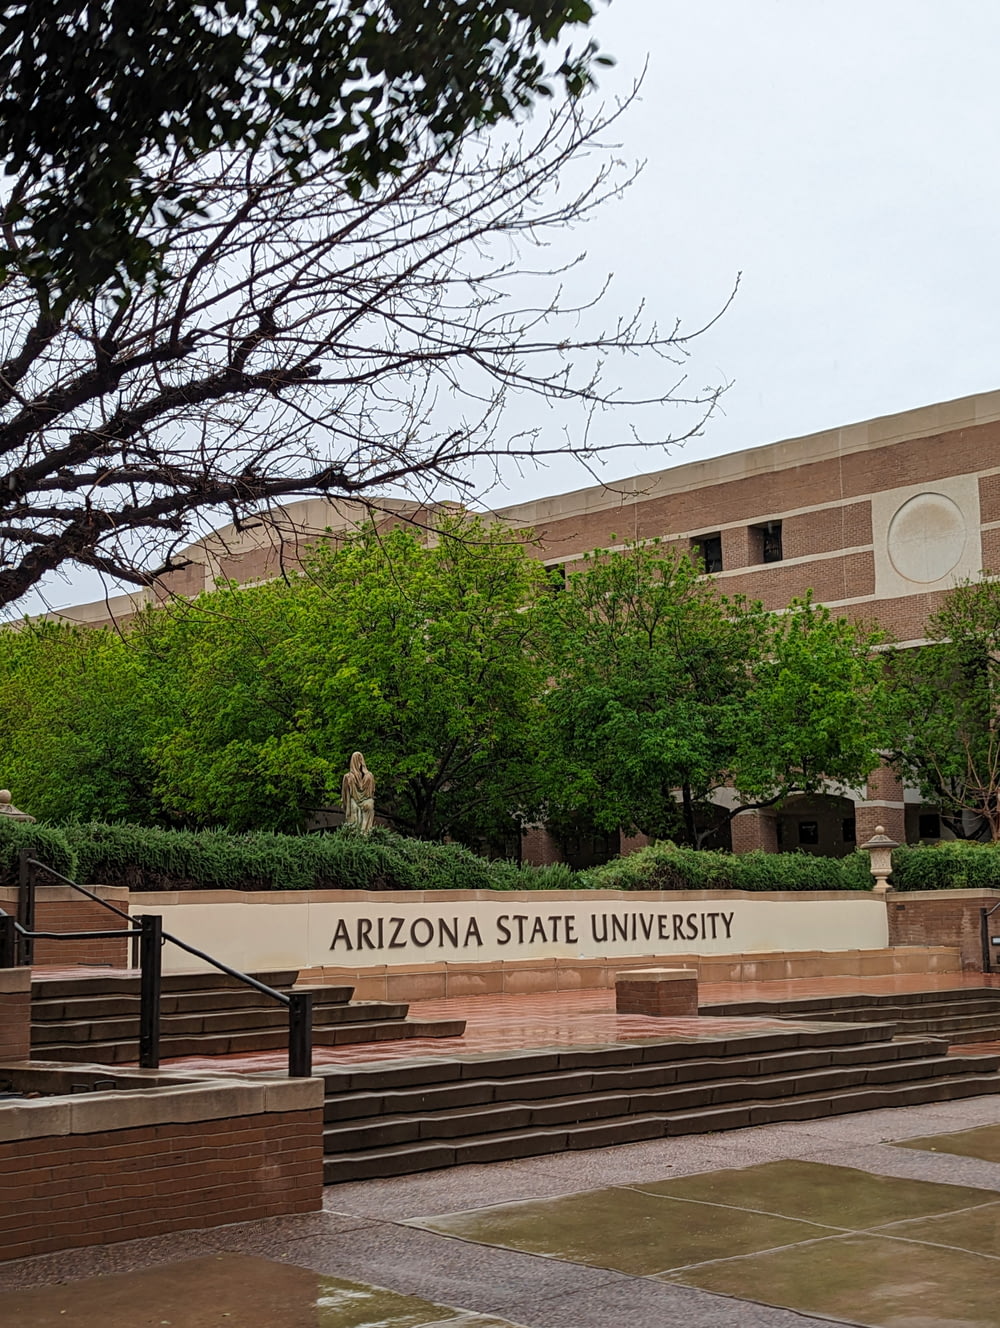 the arizona state university sign is in front of a building